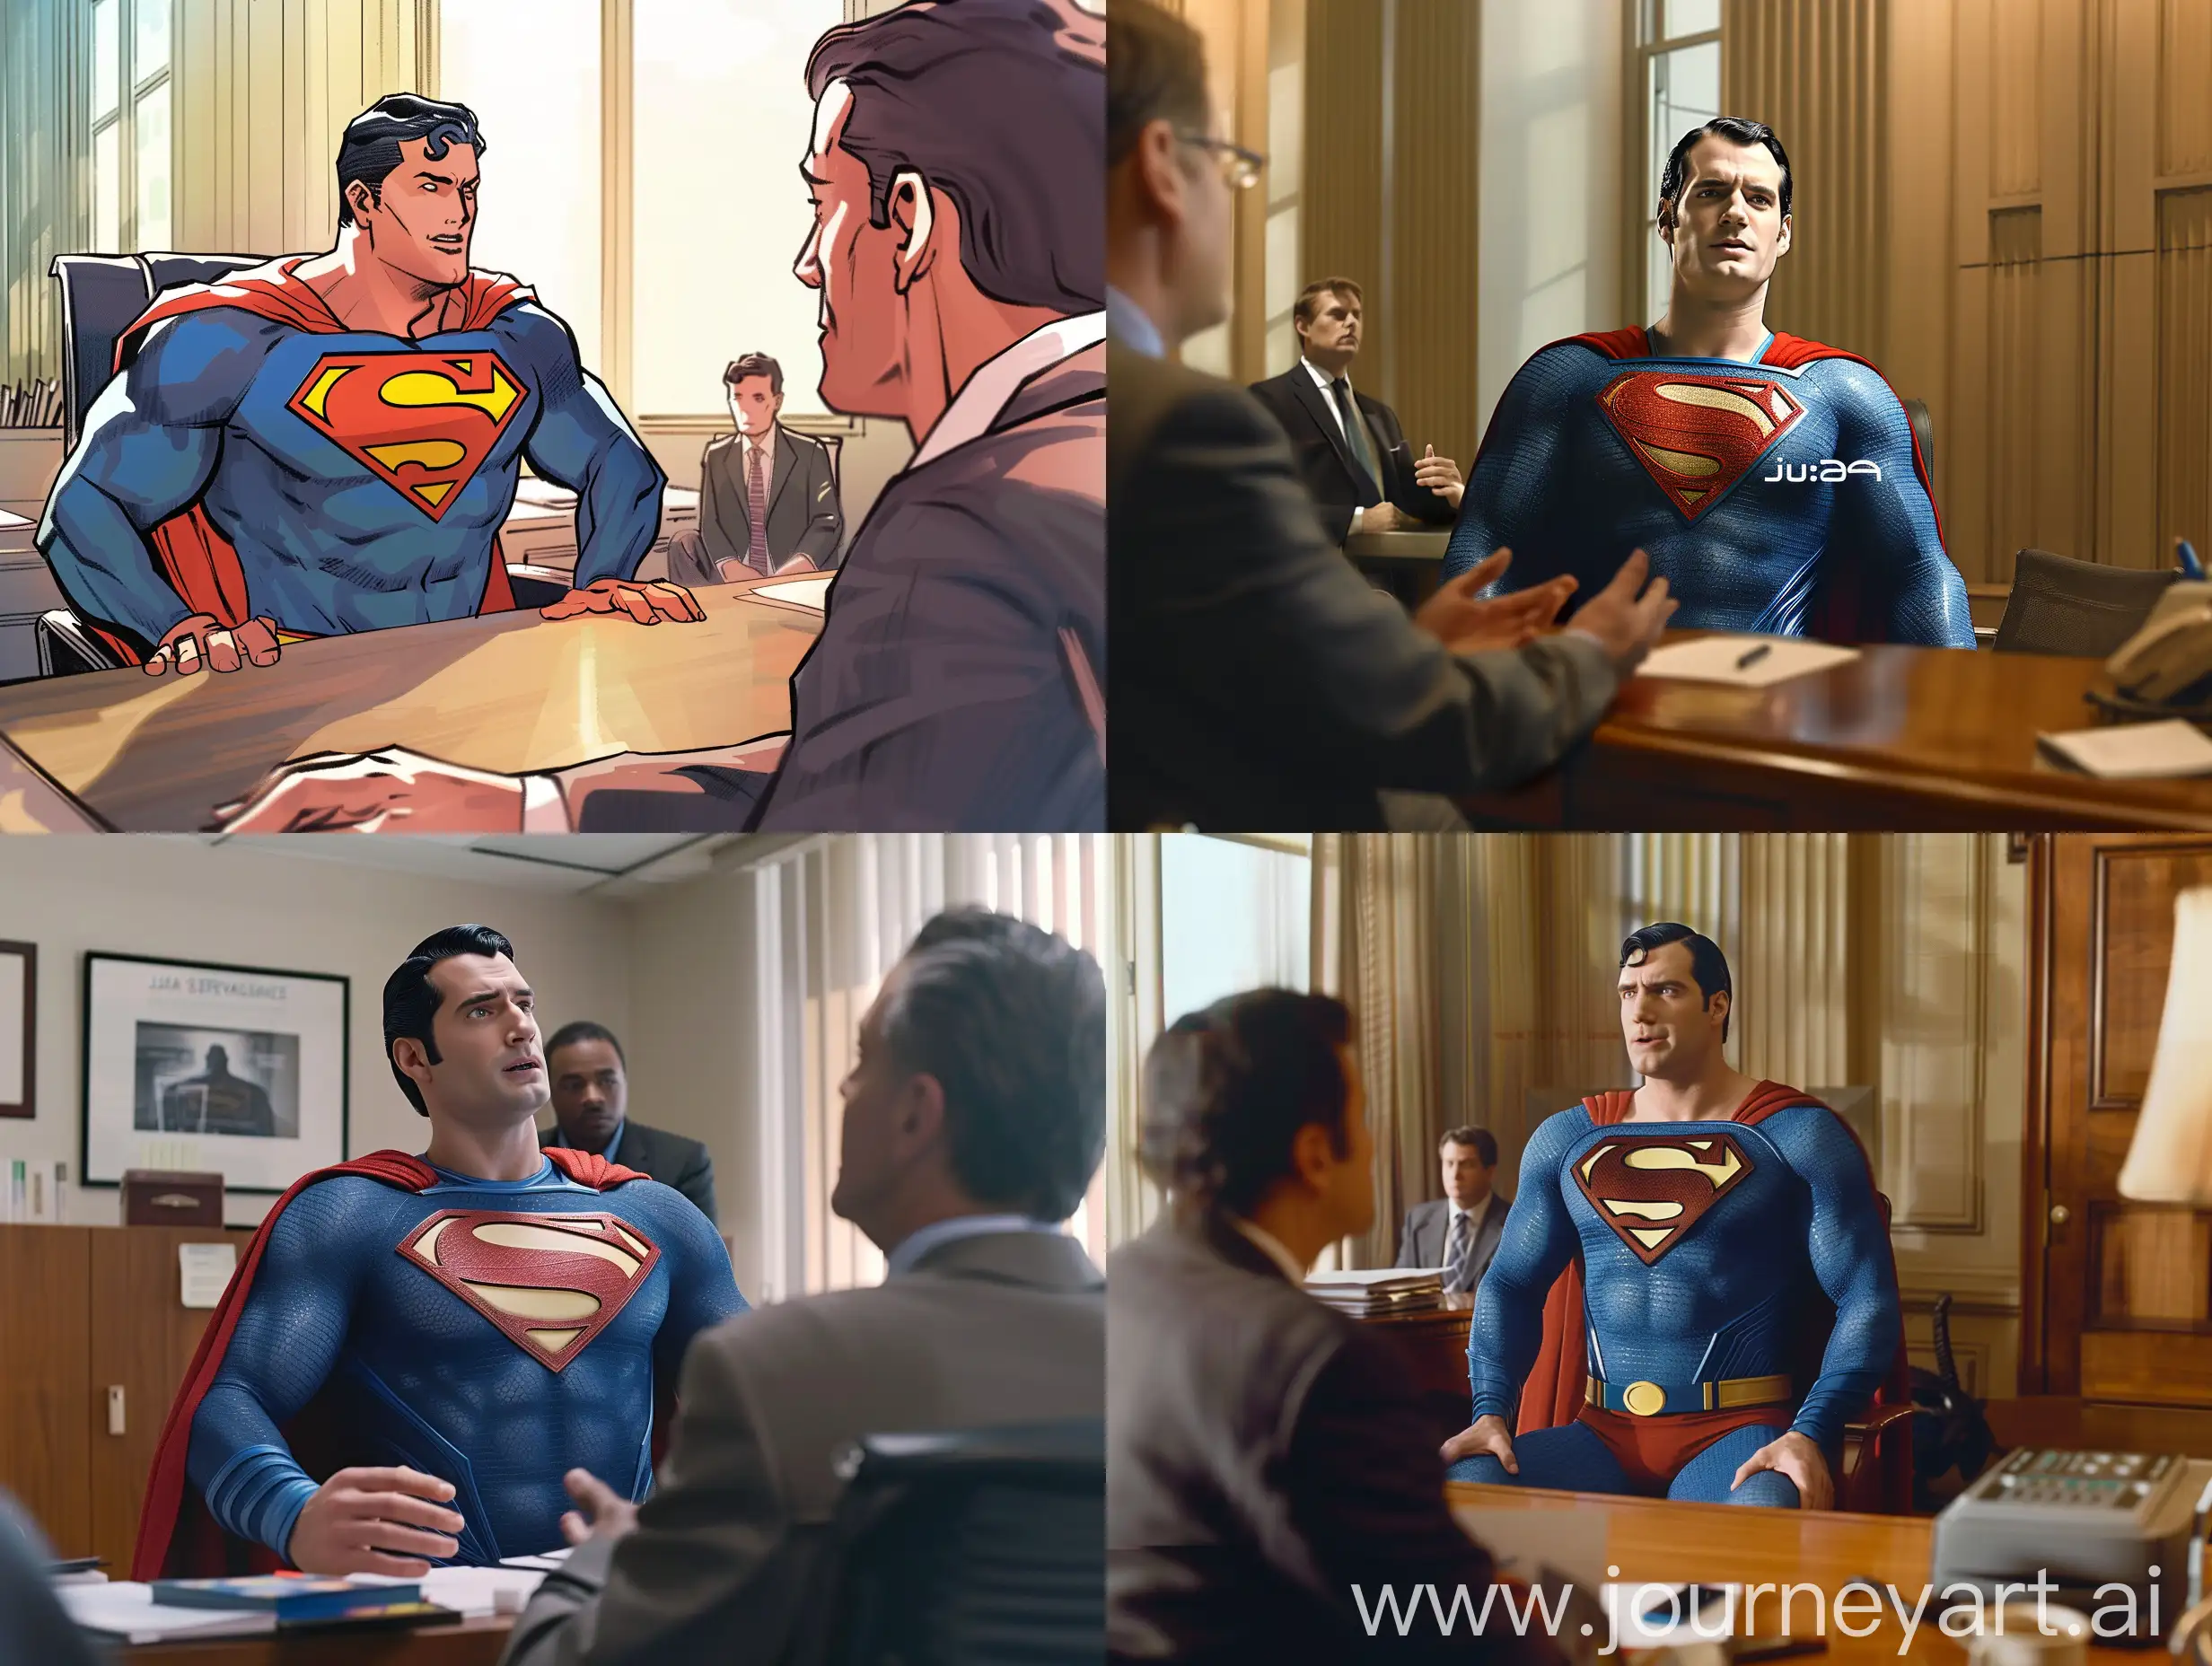 superman with a jira service management logo on his suit, conversation with man in suit, office setting, man in suit asks question,superman sitting behind desk,man in suit sitting on chair,casual --v 6 --ar 4:3